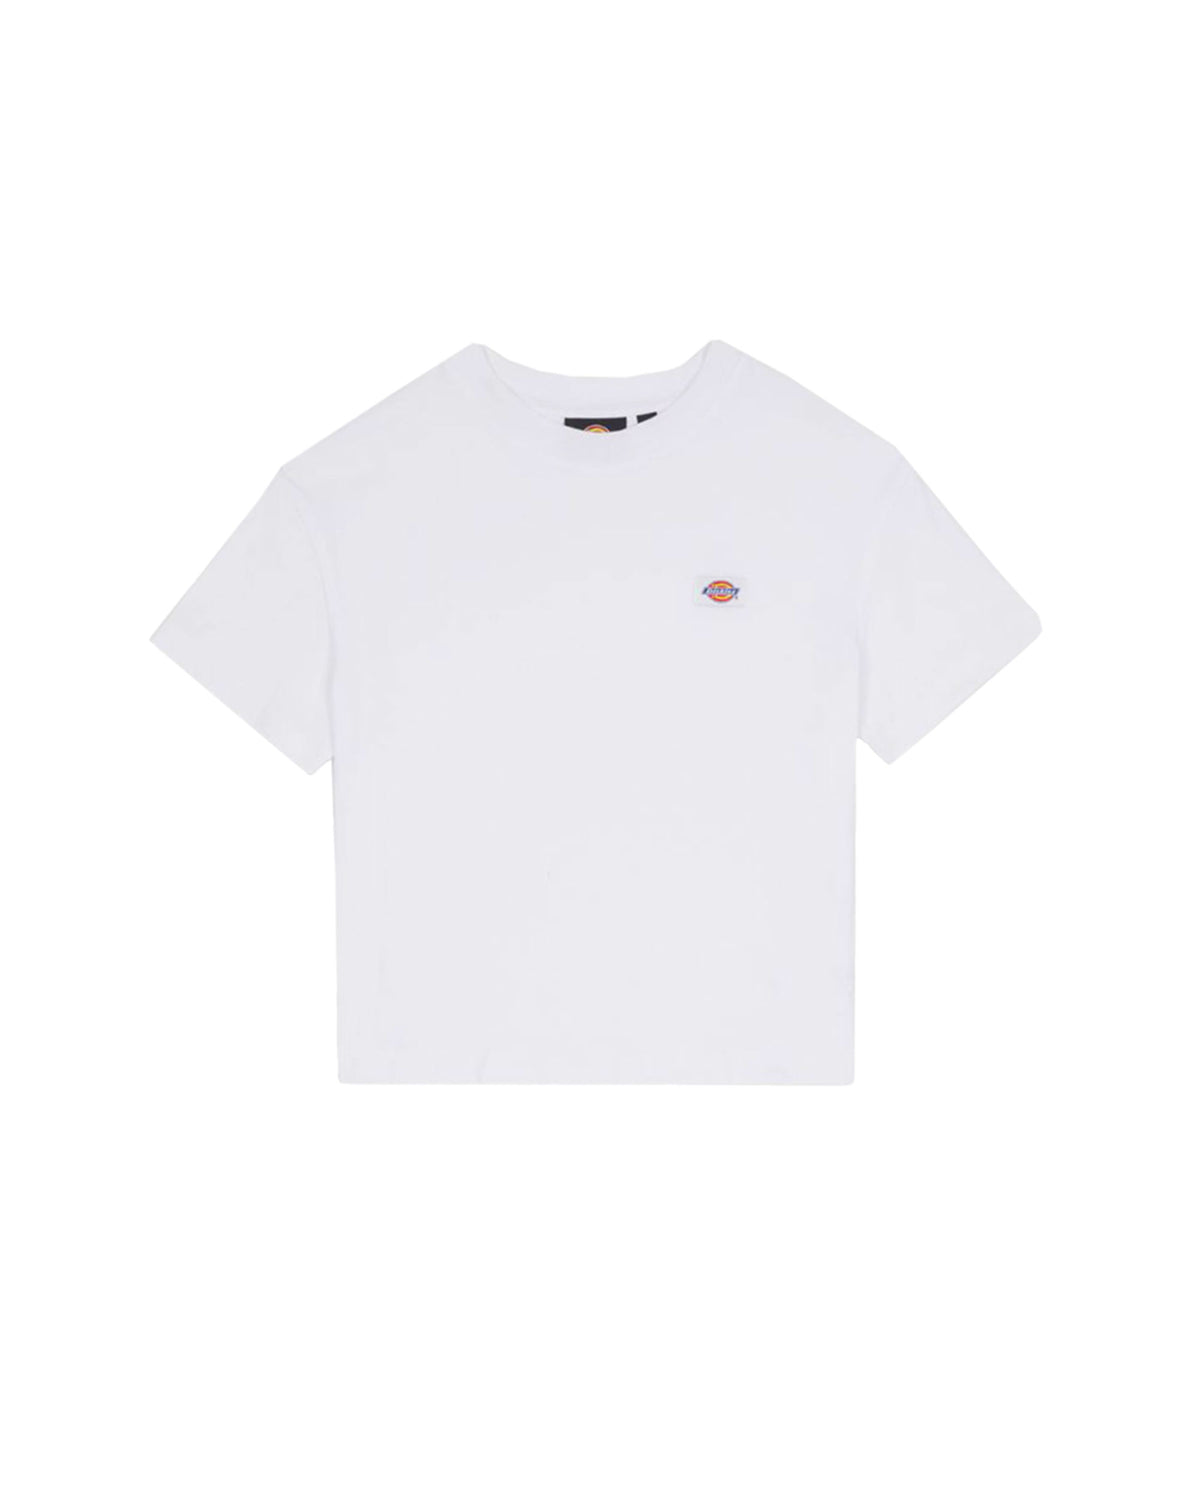 Woman's Tee Dickies Oakport Boxy W White